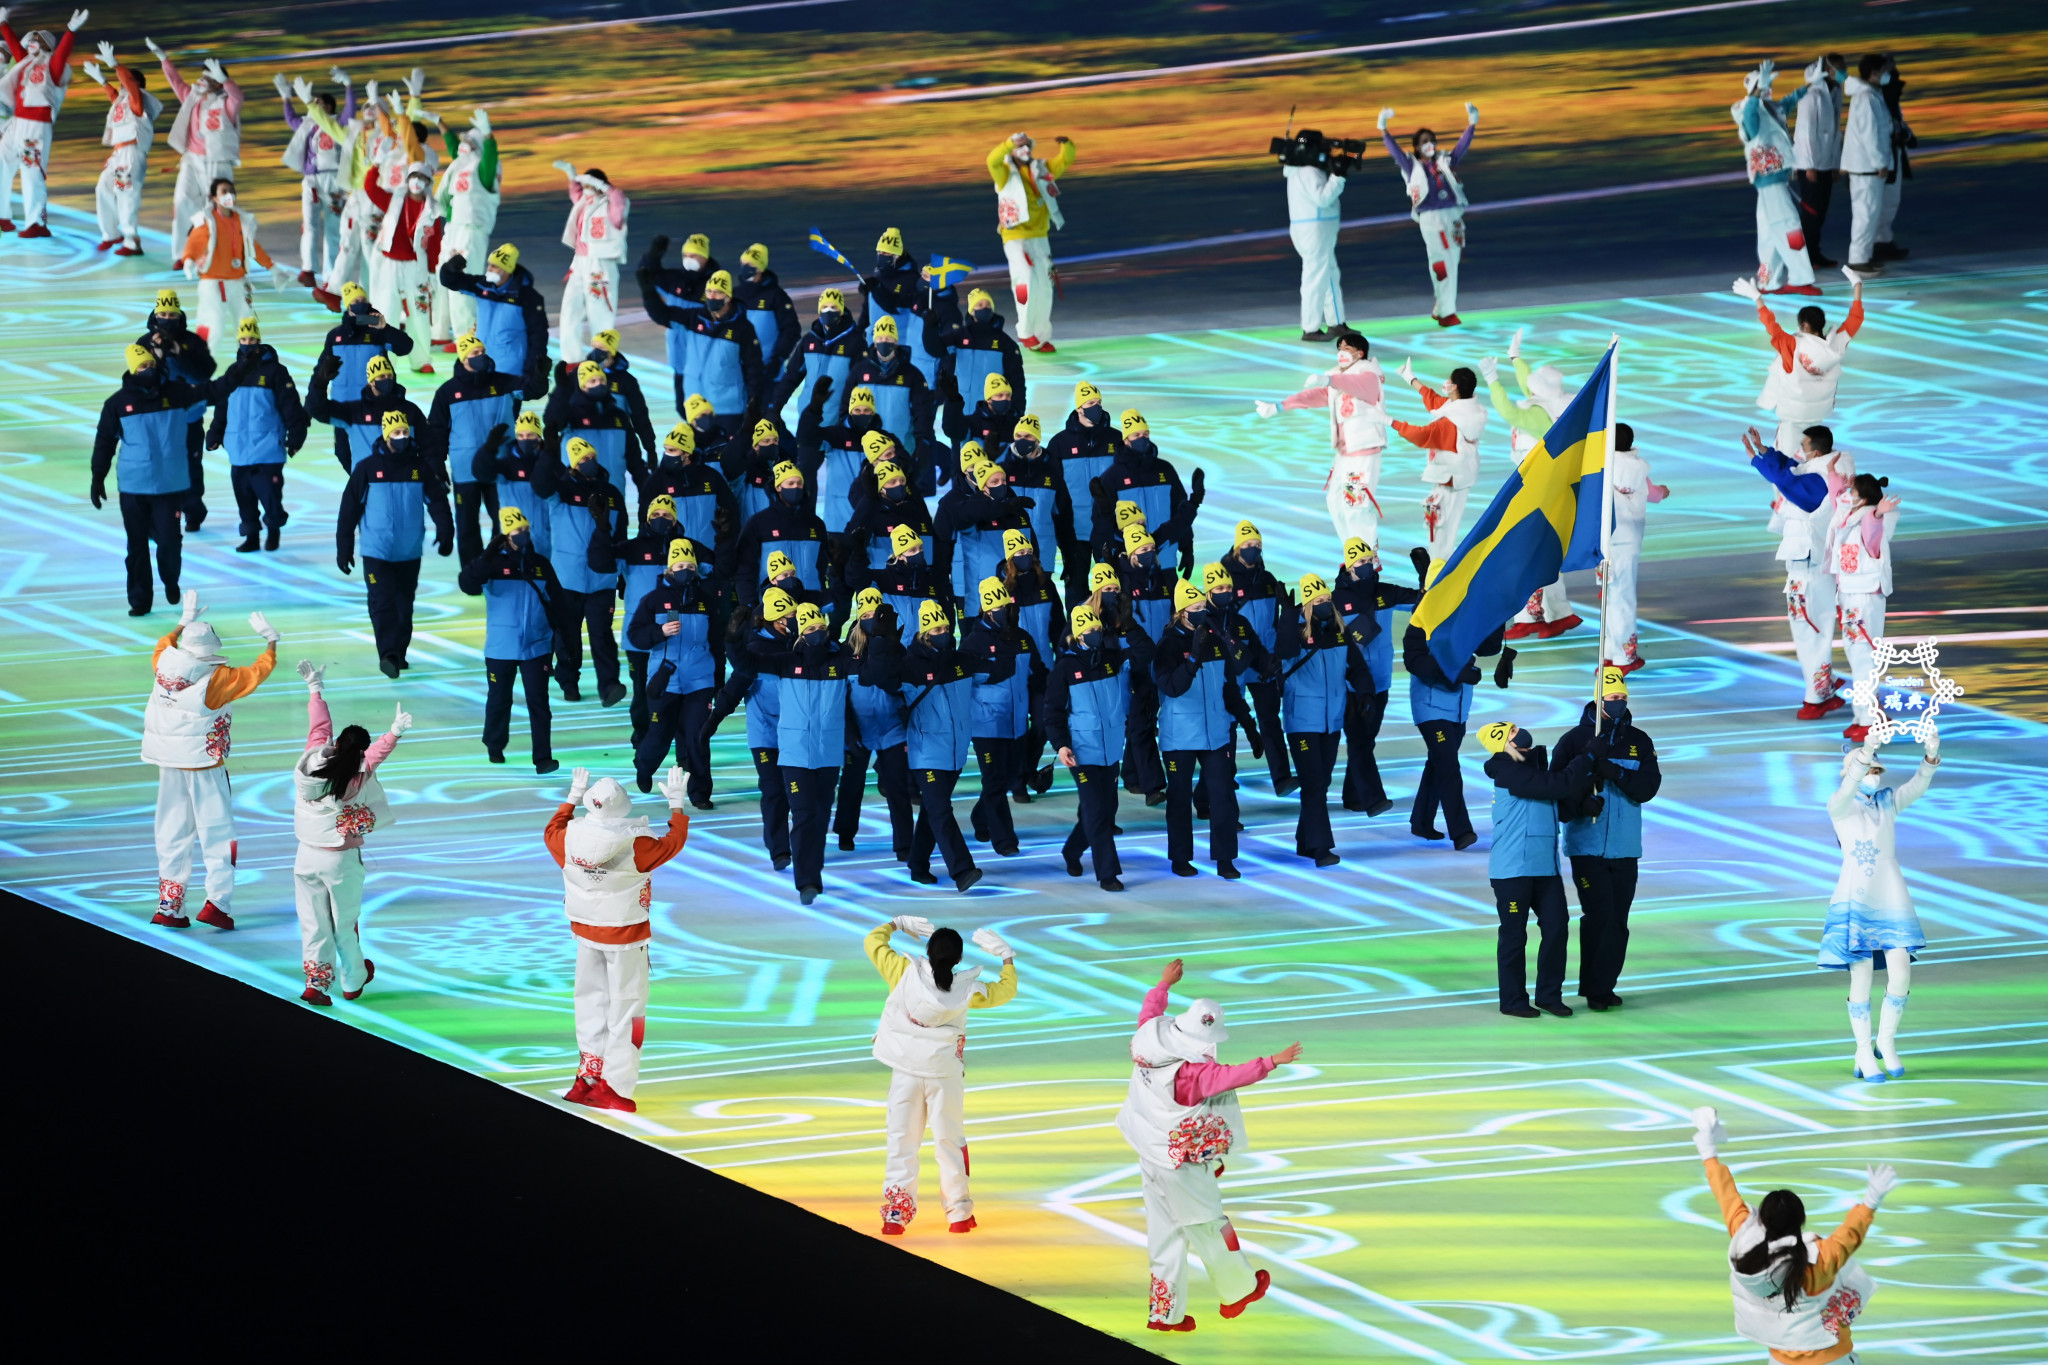 Survey reveals public support for Swedish bid for 2030 Winter Olympics